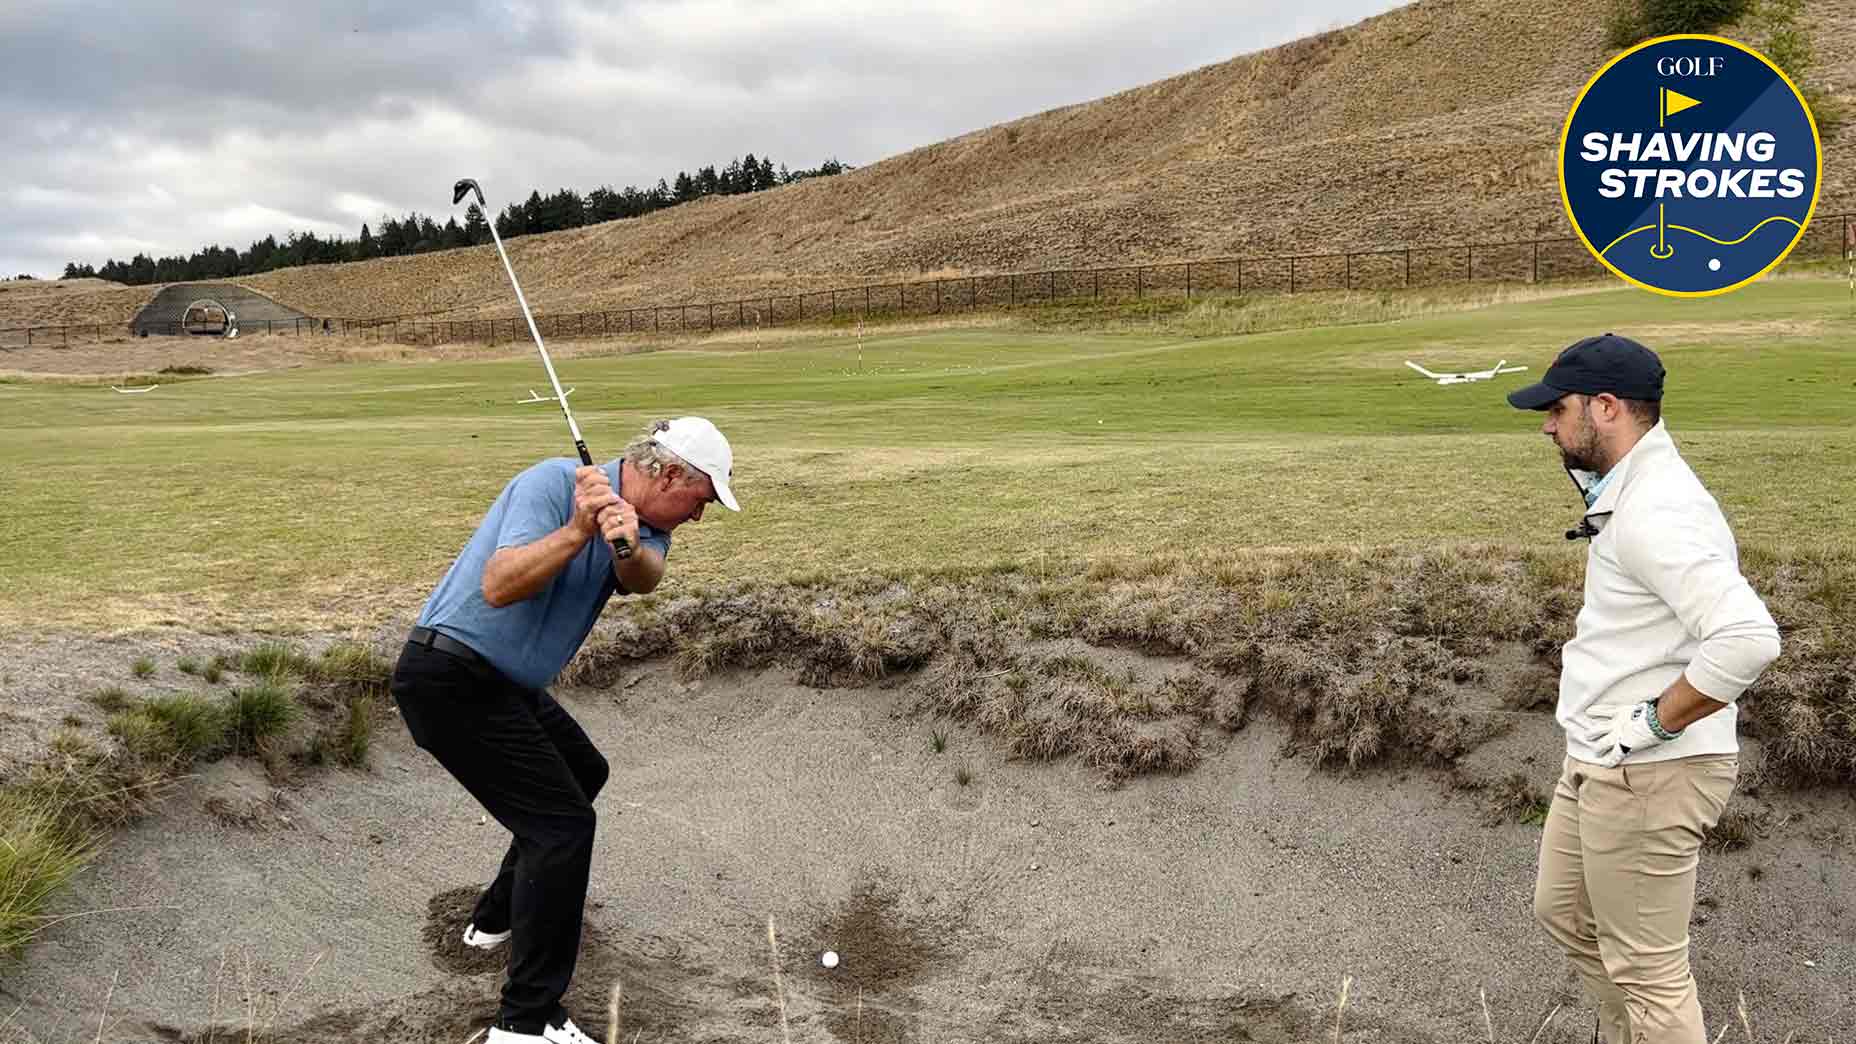 50-yard bunker shots can be tricky to execute, so GOLF Top 100 Teacher Brian Mogg says trying a different club choice can make the difference